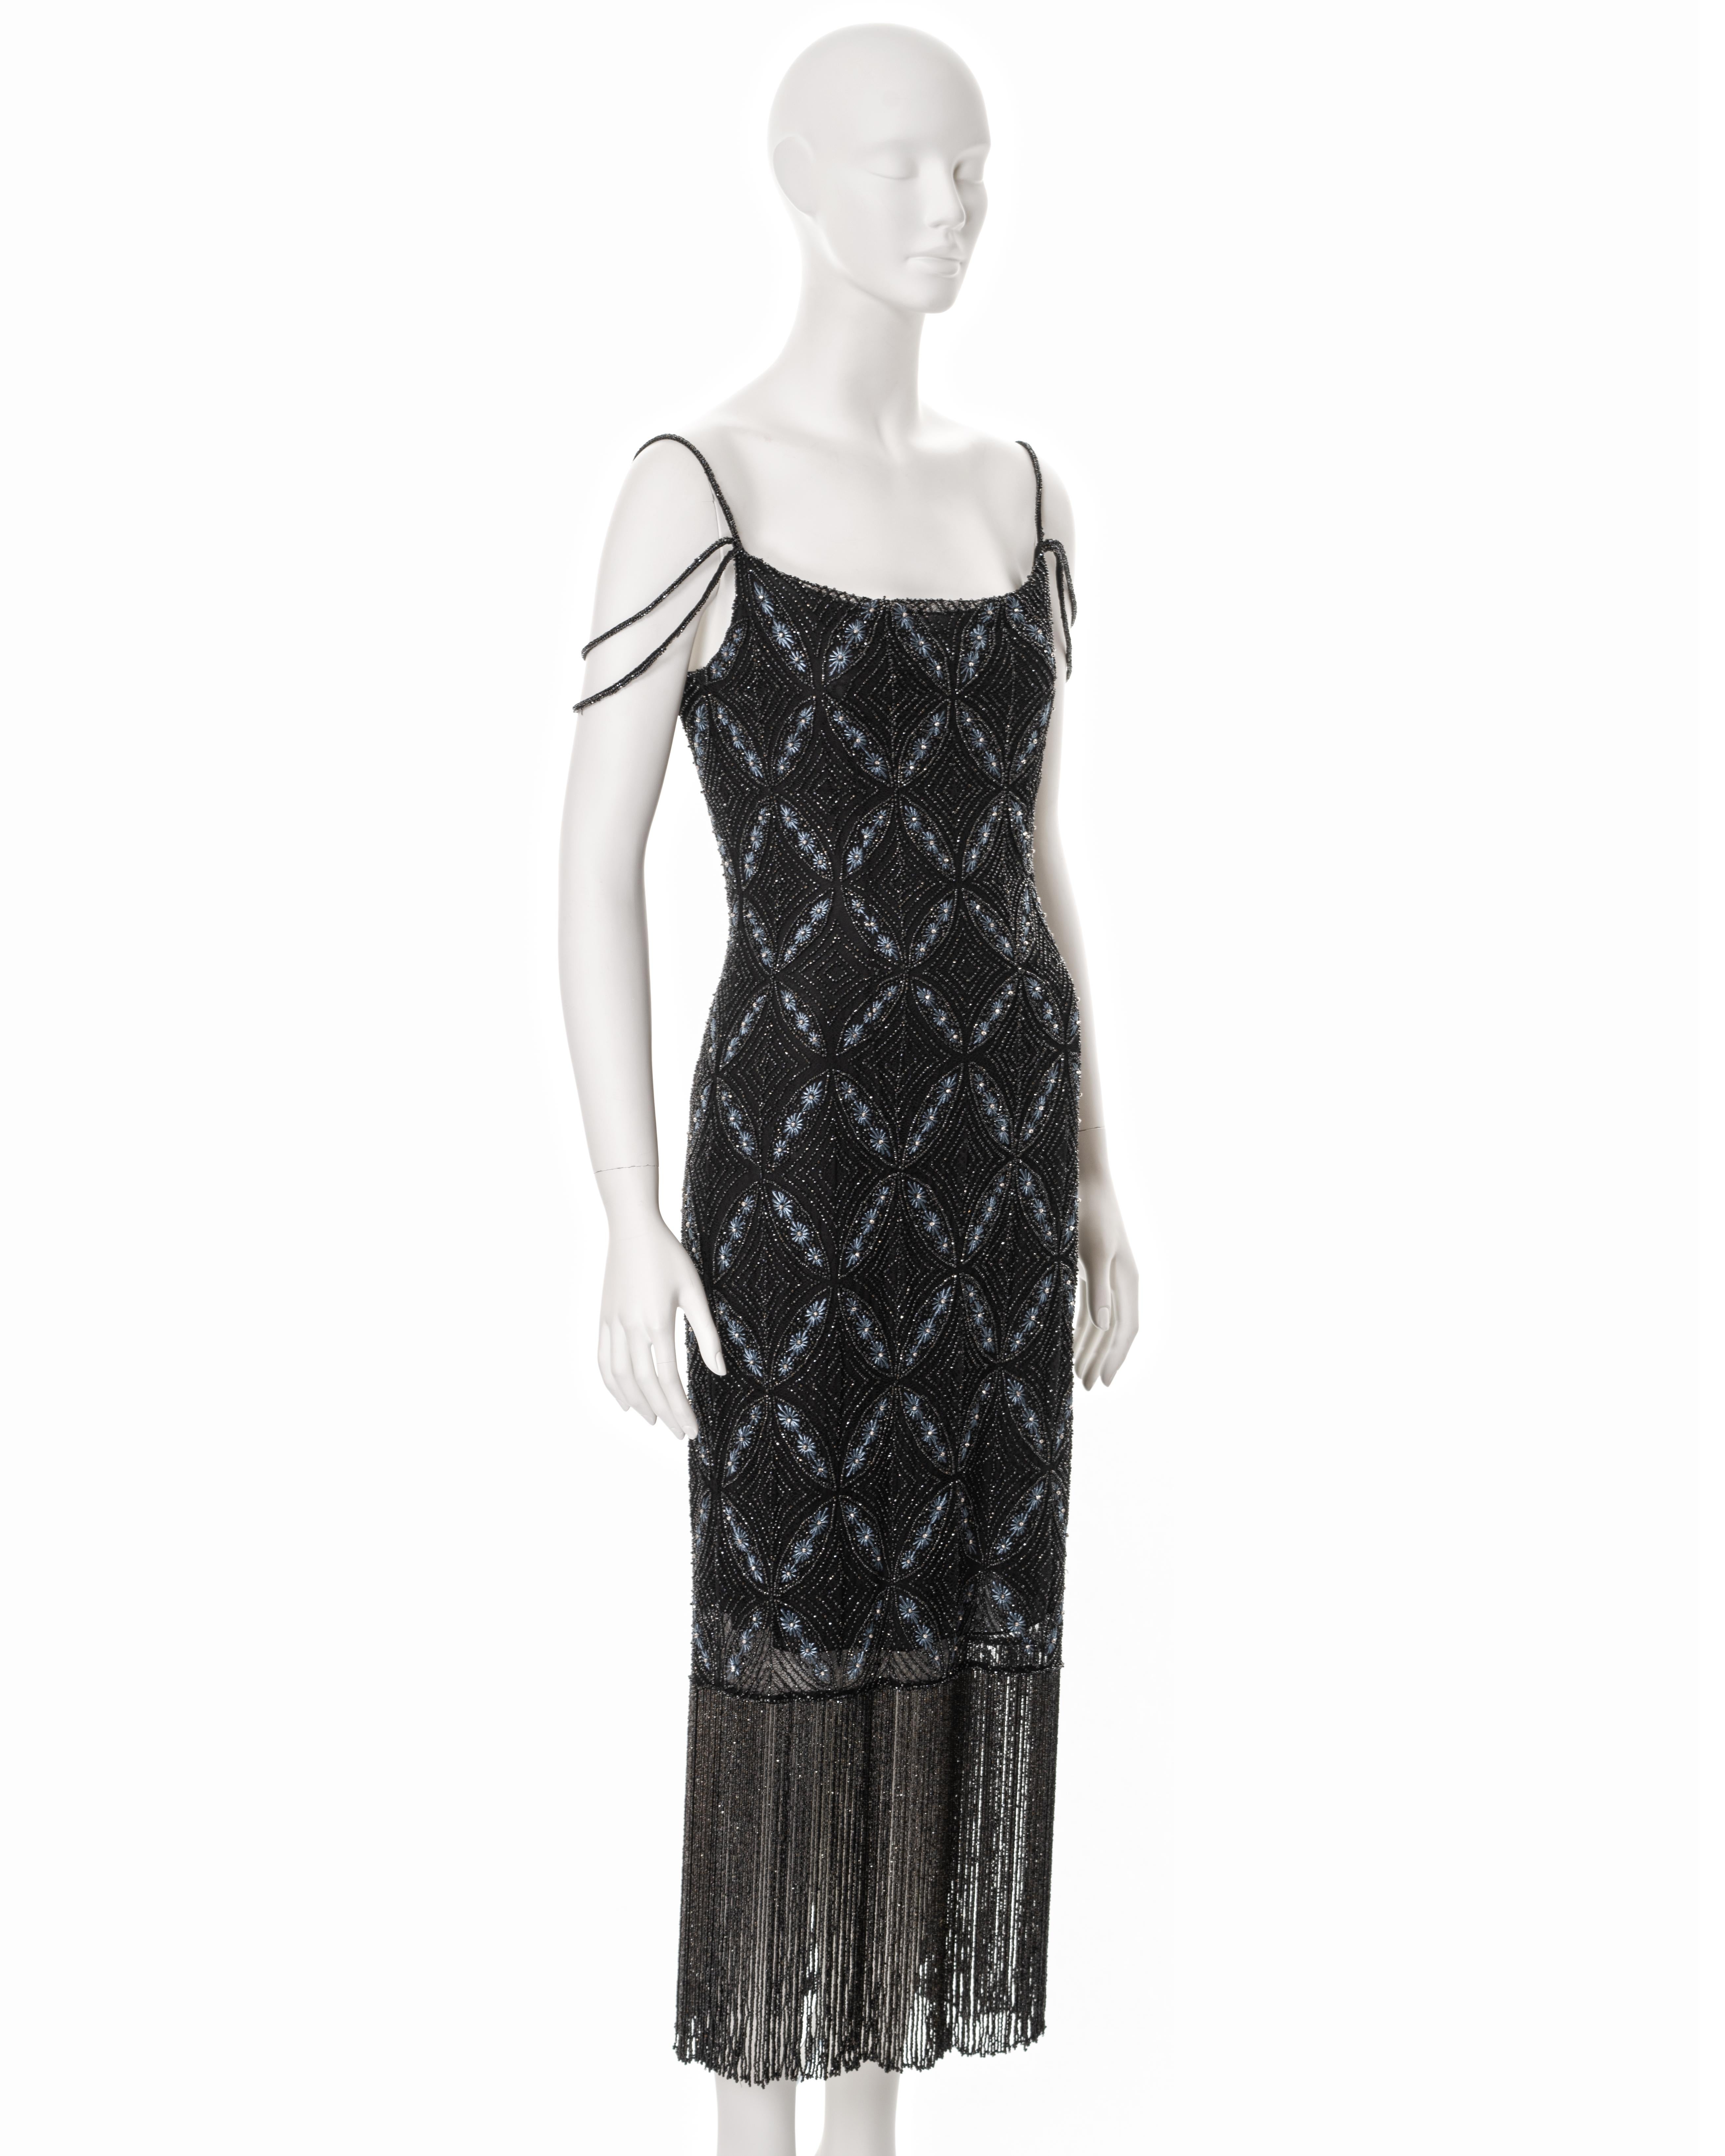 Christian Dior by John Galliano navy beaded lace fringed evening dress, ss 2000 For Sale 1